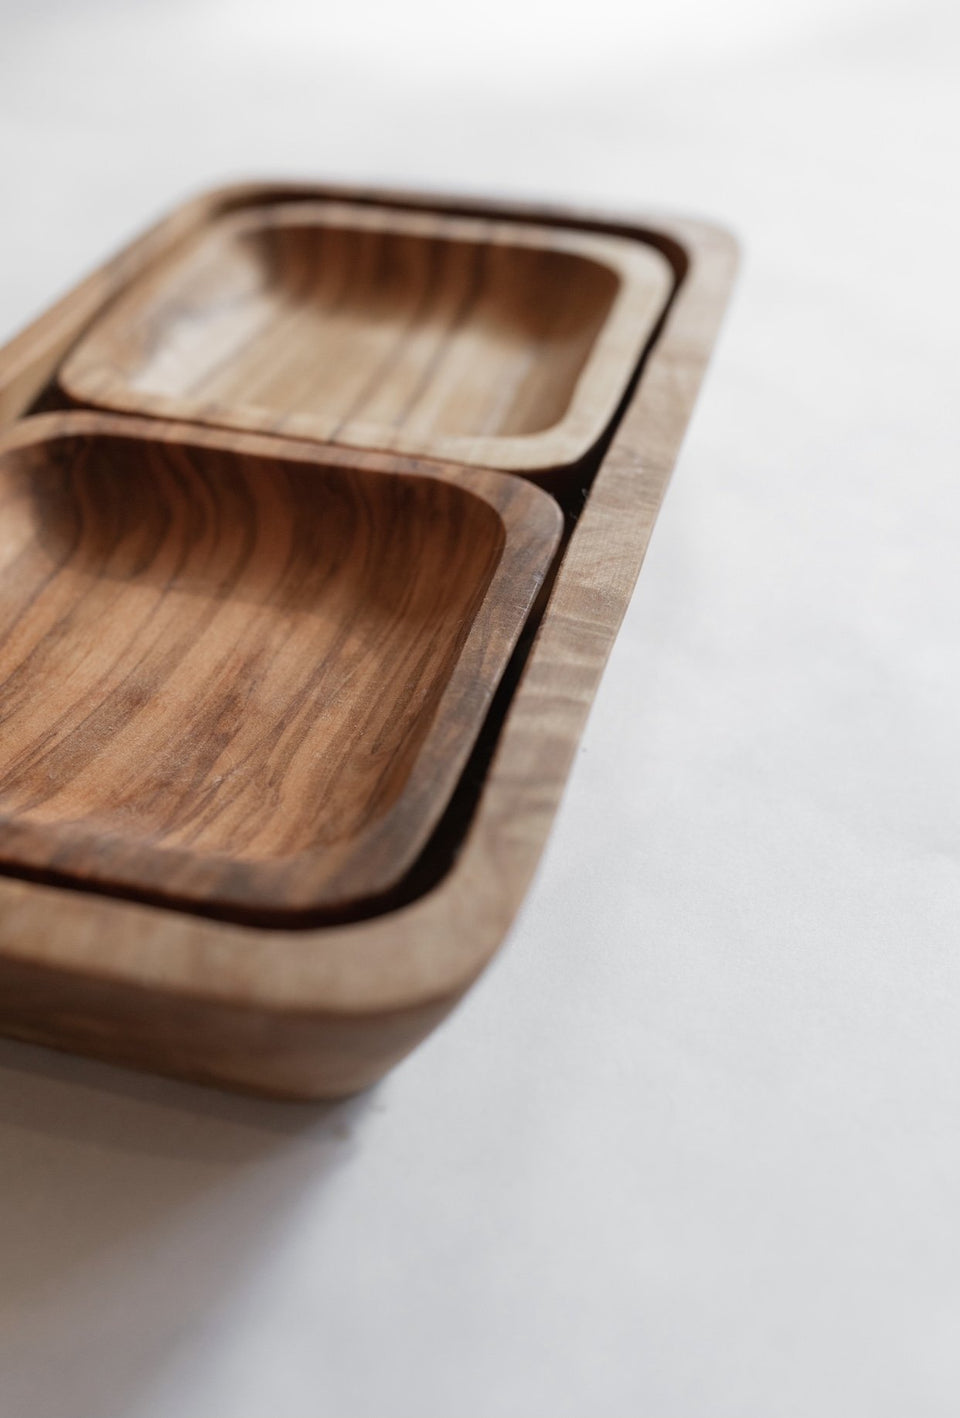 Natural OliveWood - Three Piece Set of Dishes